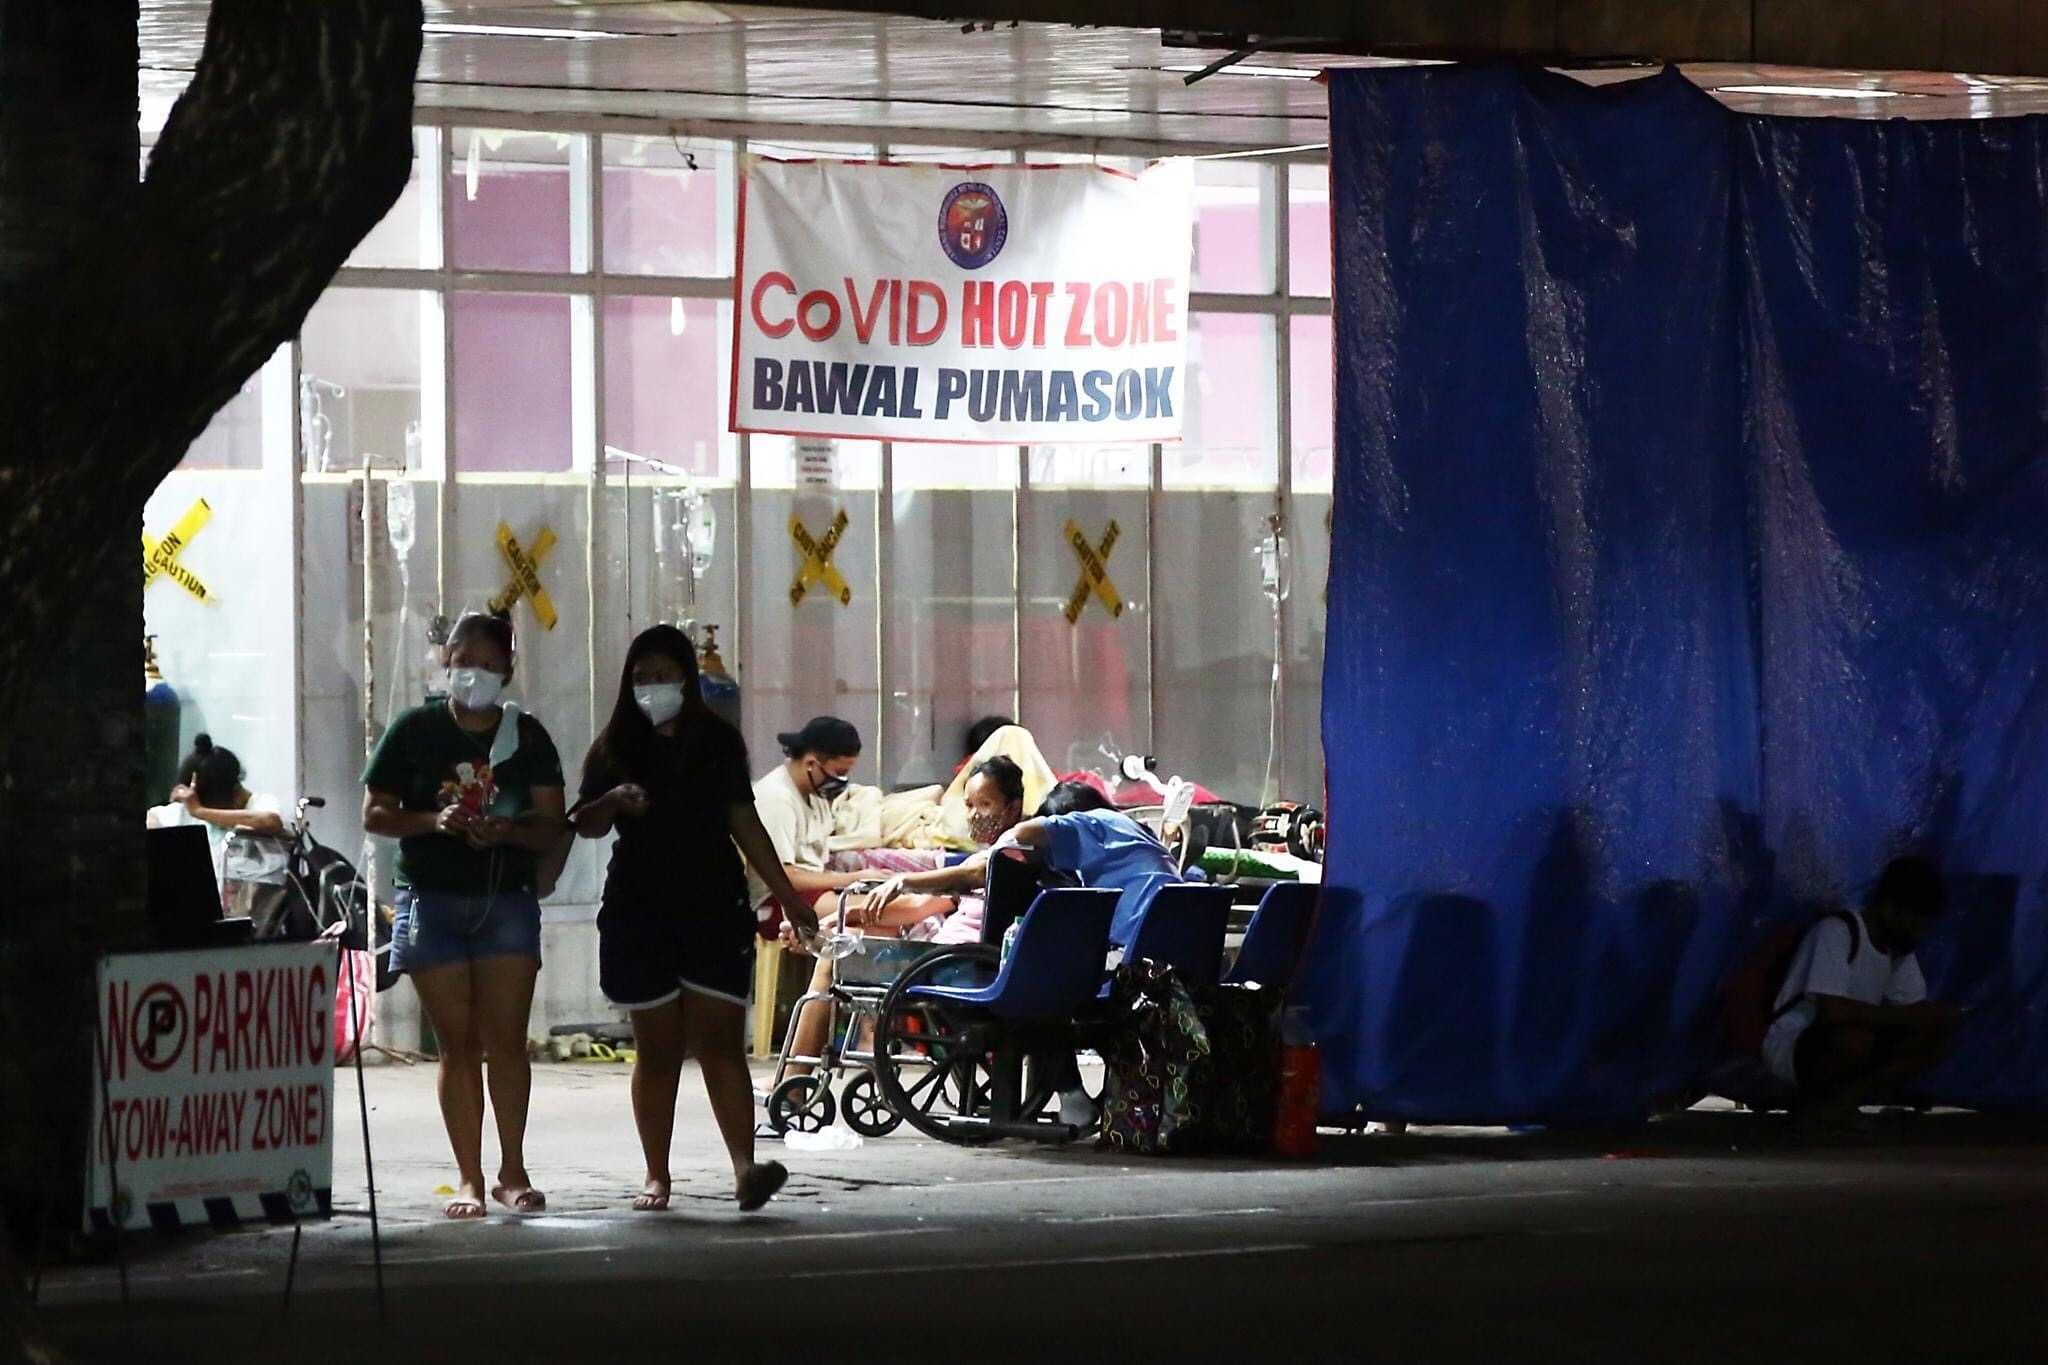 In new record high, Philippines reports 8,019 new COVID-19 cases